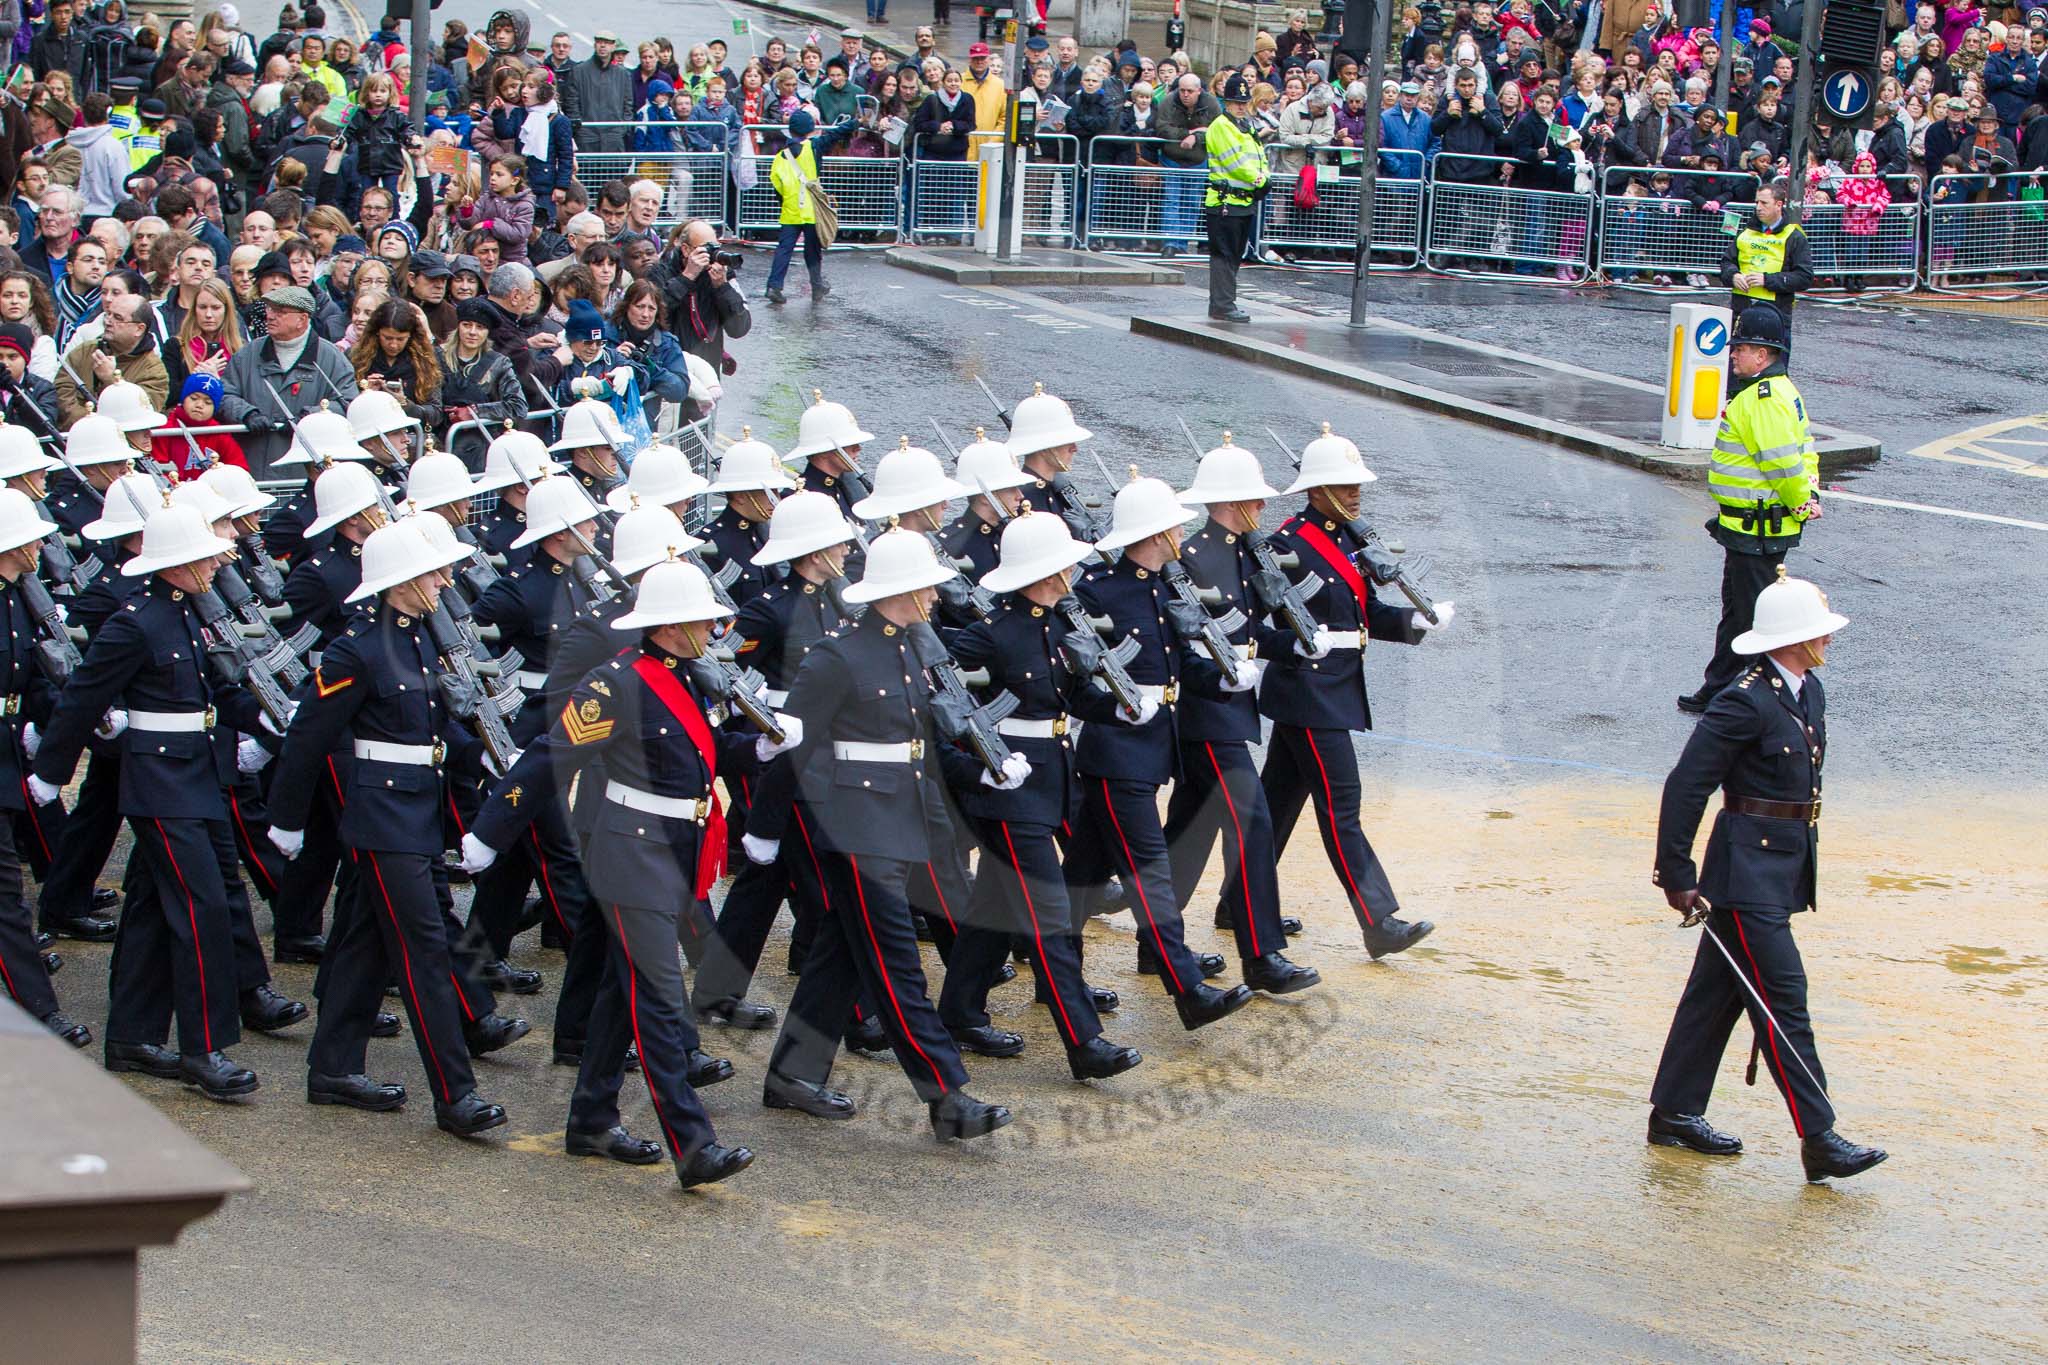 Lord Mayor's Show 2012: Entry 88 - Royal Marines..
Press stand opposite Mansion House, City of London,
London,
Greater London,
United Kingdom,
on 10 November 2012 at 11:39, image #1158